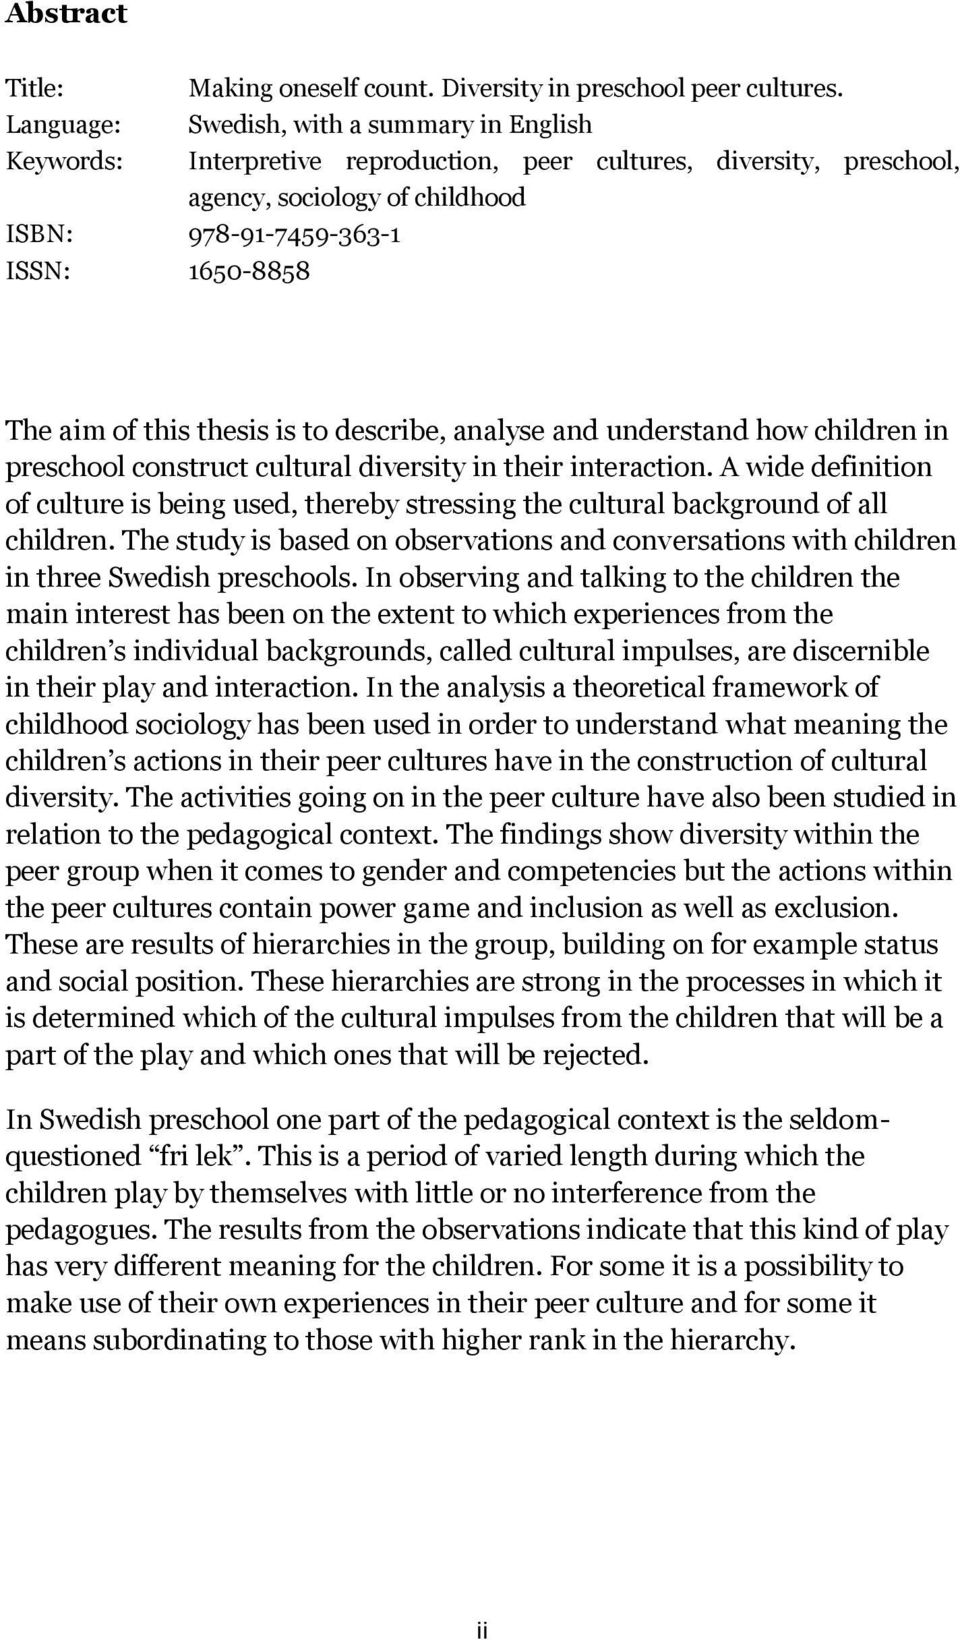 describe, analyse and understand how children in preschool construct cultural diversity in their interaction.